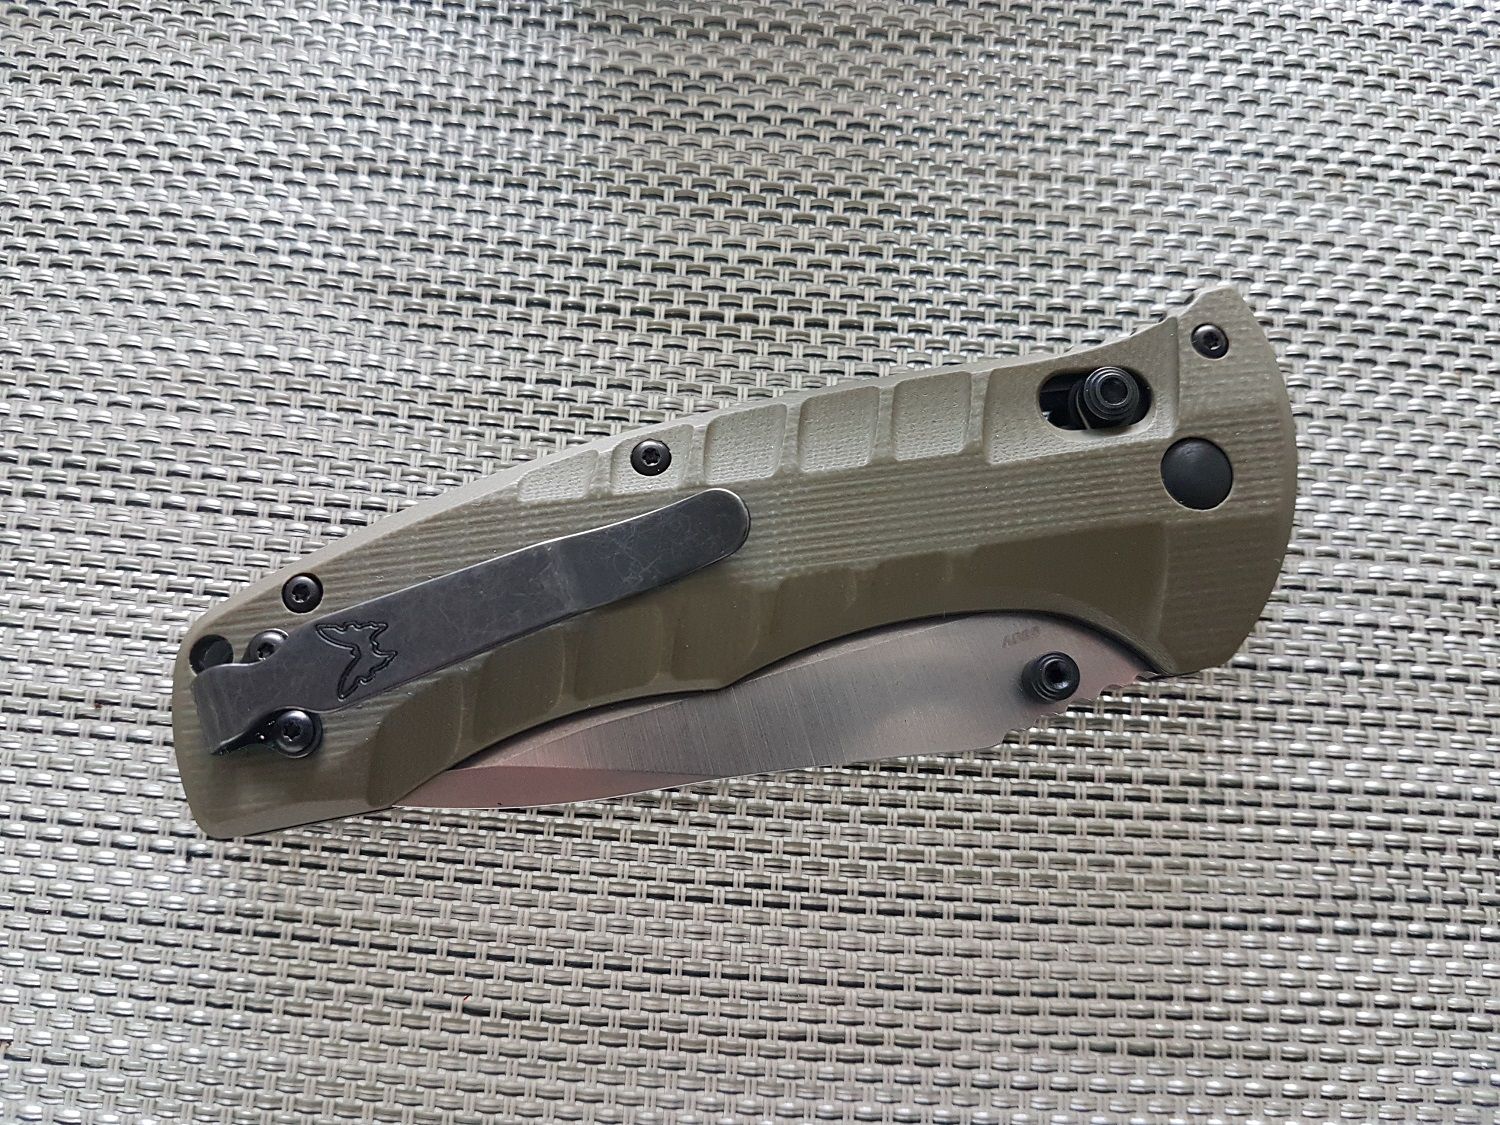 The Benchmade 980 TURRET tactical folding knife is a very large 100% ambidextrous Axis lock folder with a 9.40cm (3.7in) drop point blade of CPM-S30V steel, 3.150mm (0.124in) thick.